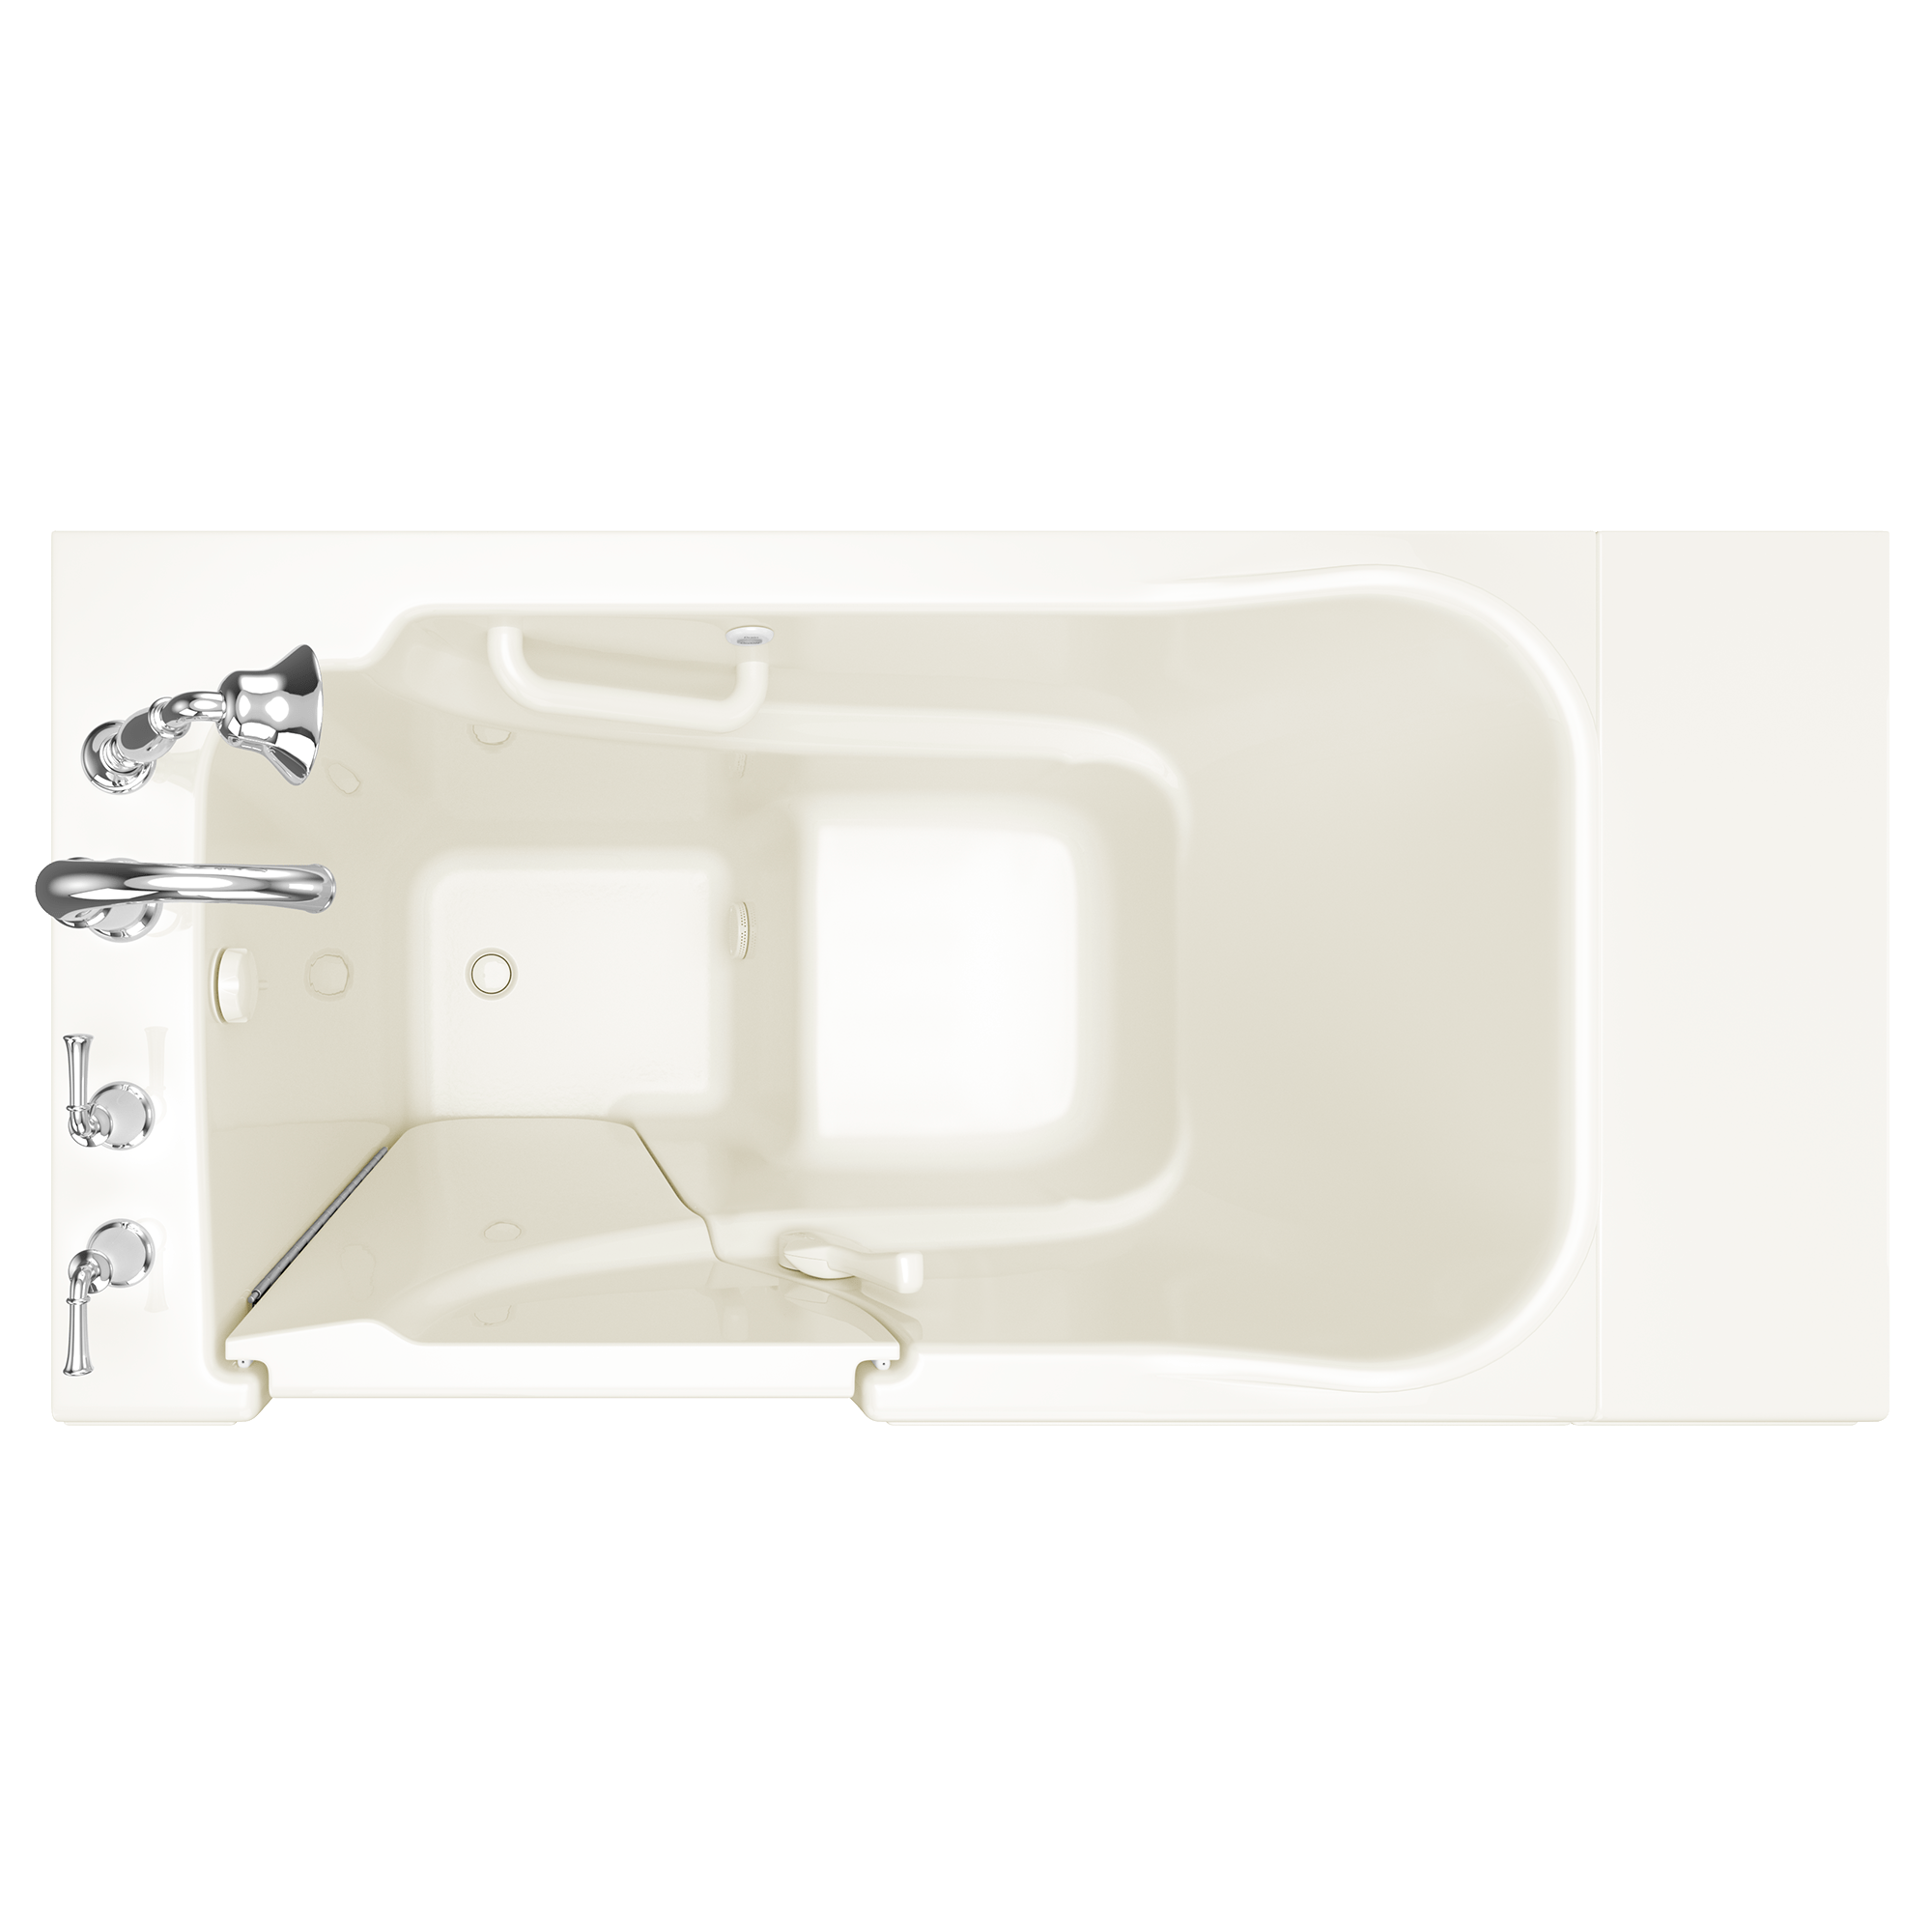 Gelcoat Value Series 30 x 52 -Inch Walk-in Tub With Soaker System - Left-Hand Drain With Faucet